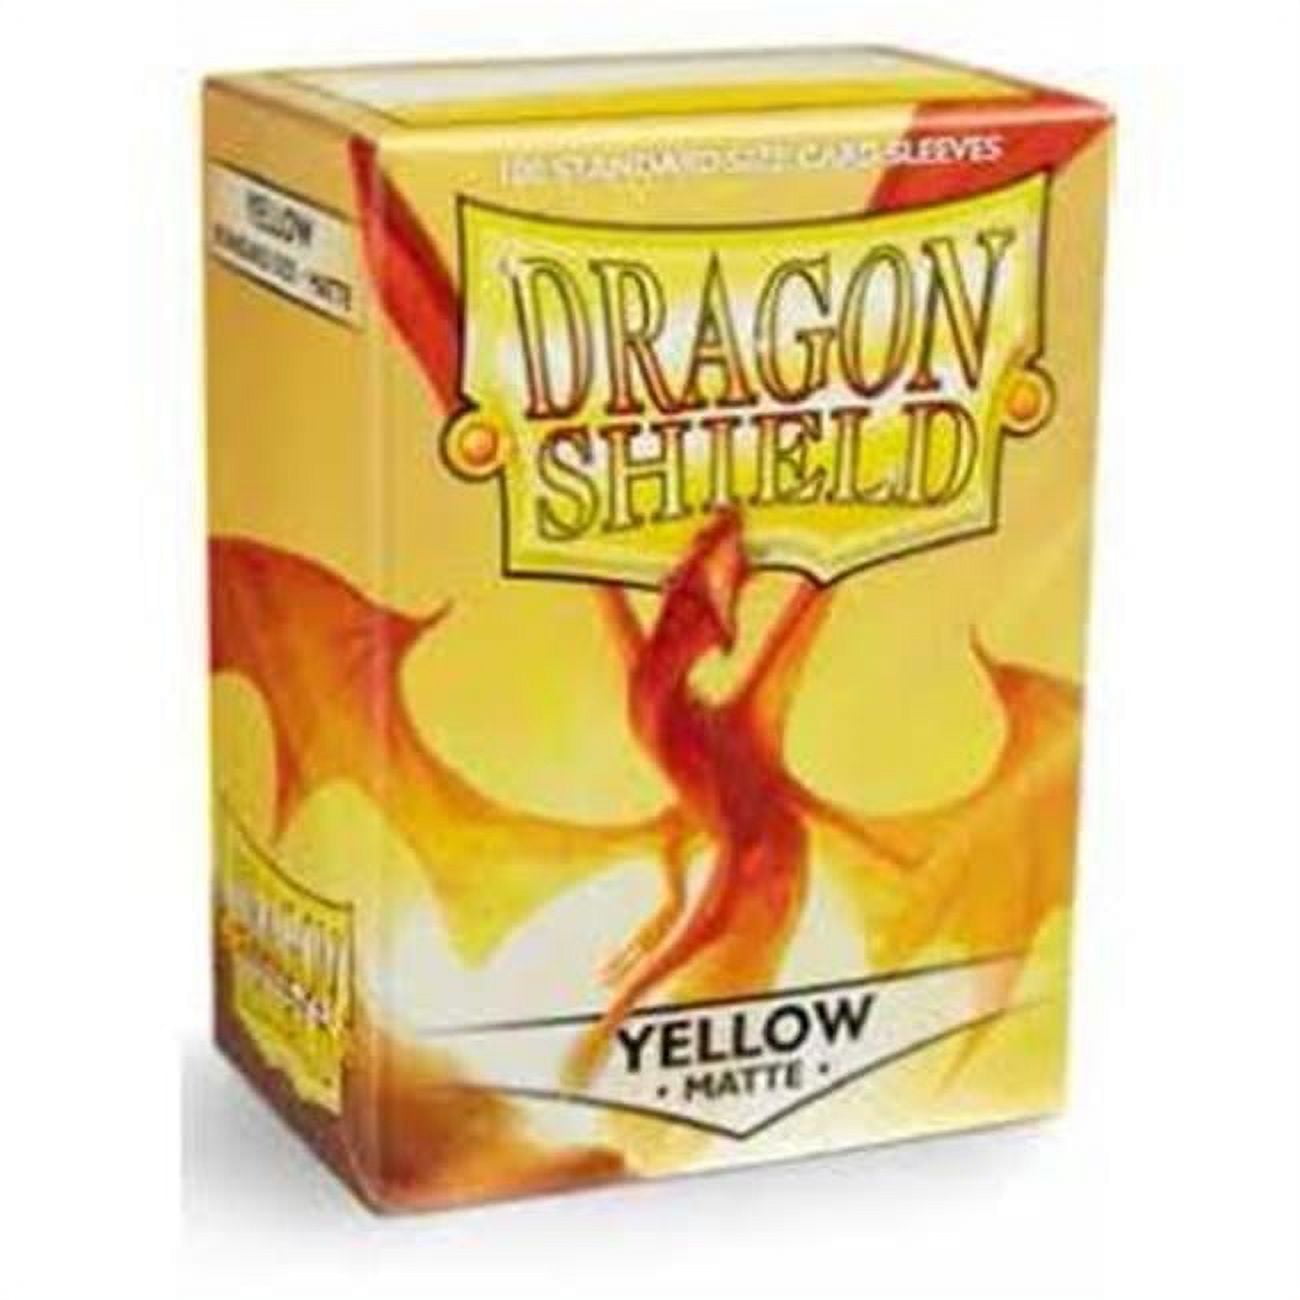 Atm11014 Dragon Shield Card Sleeves, Matte Yellow - 100 Count